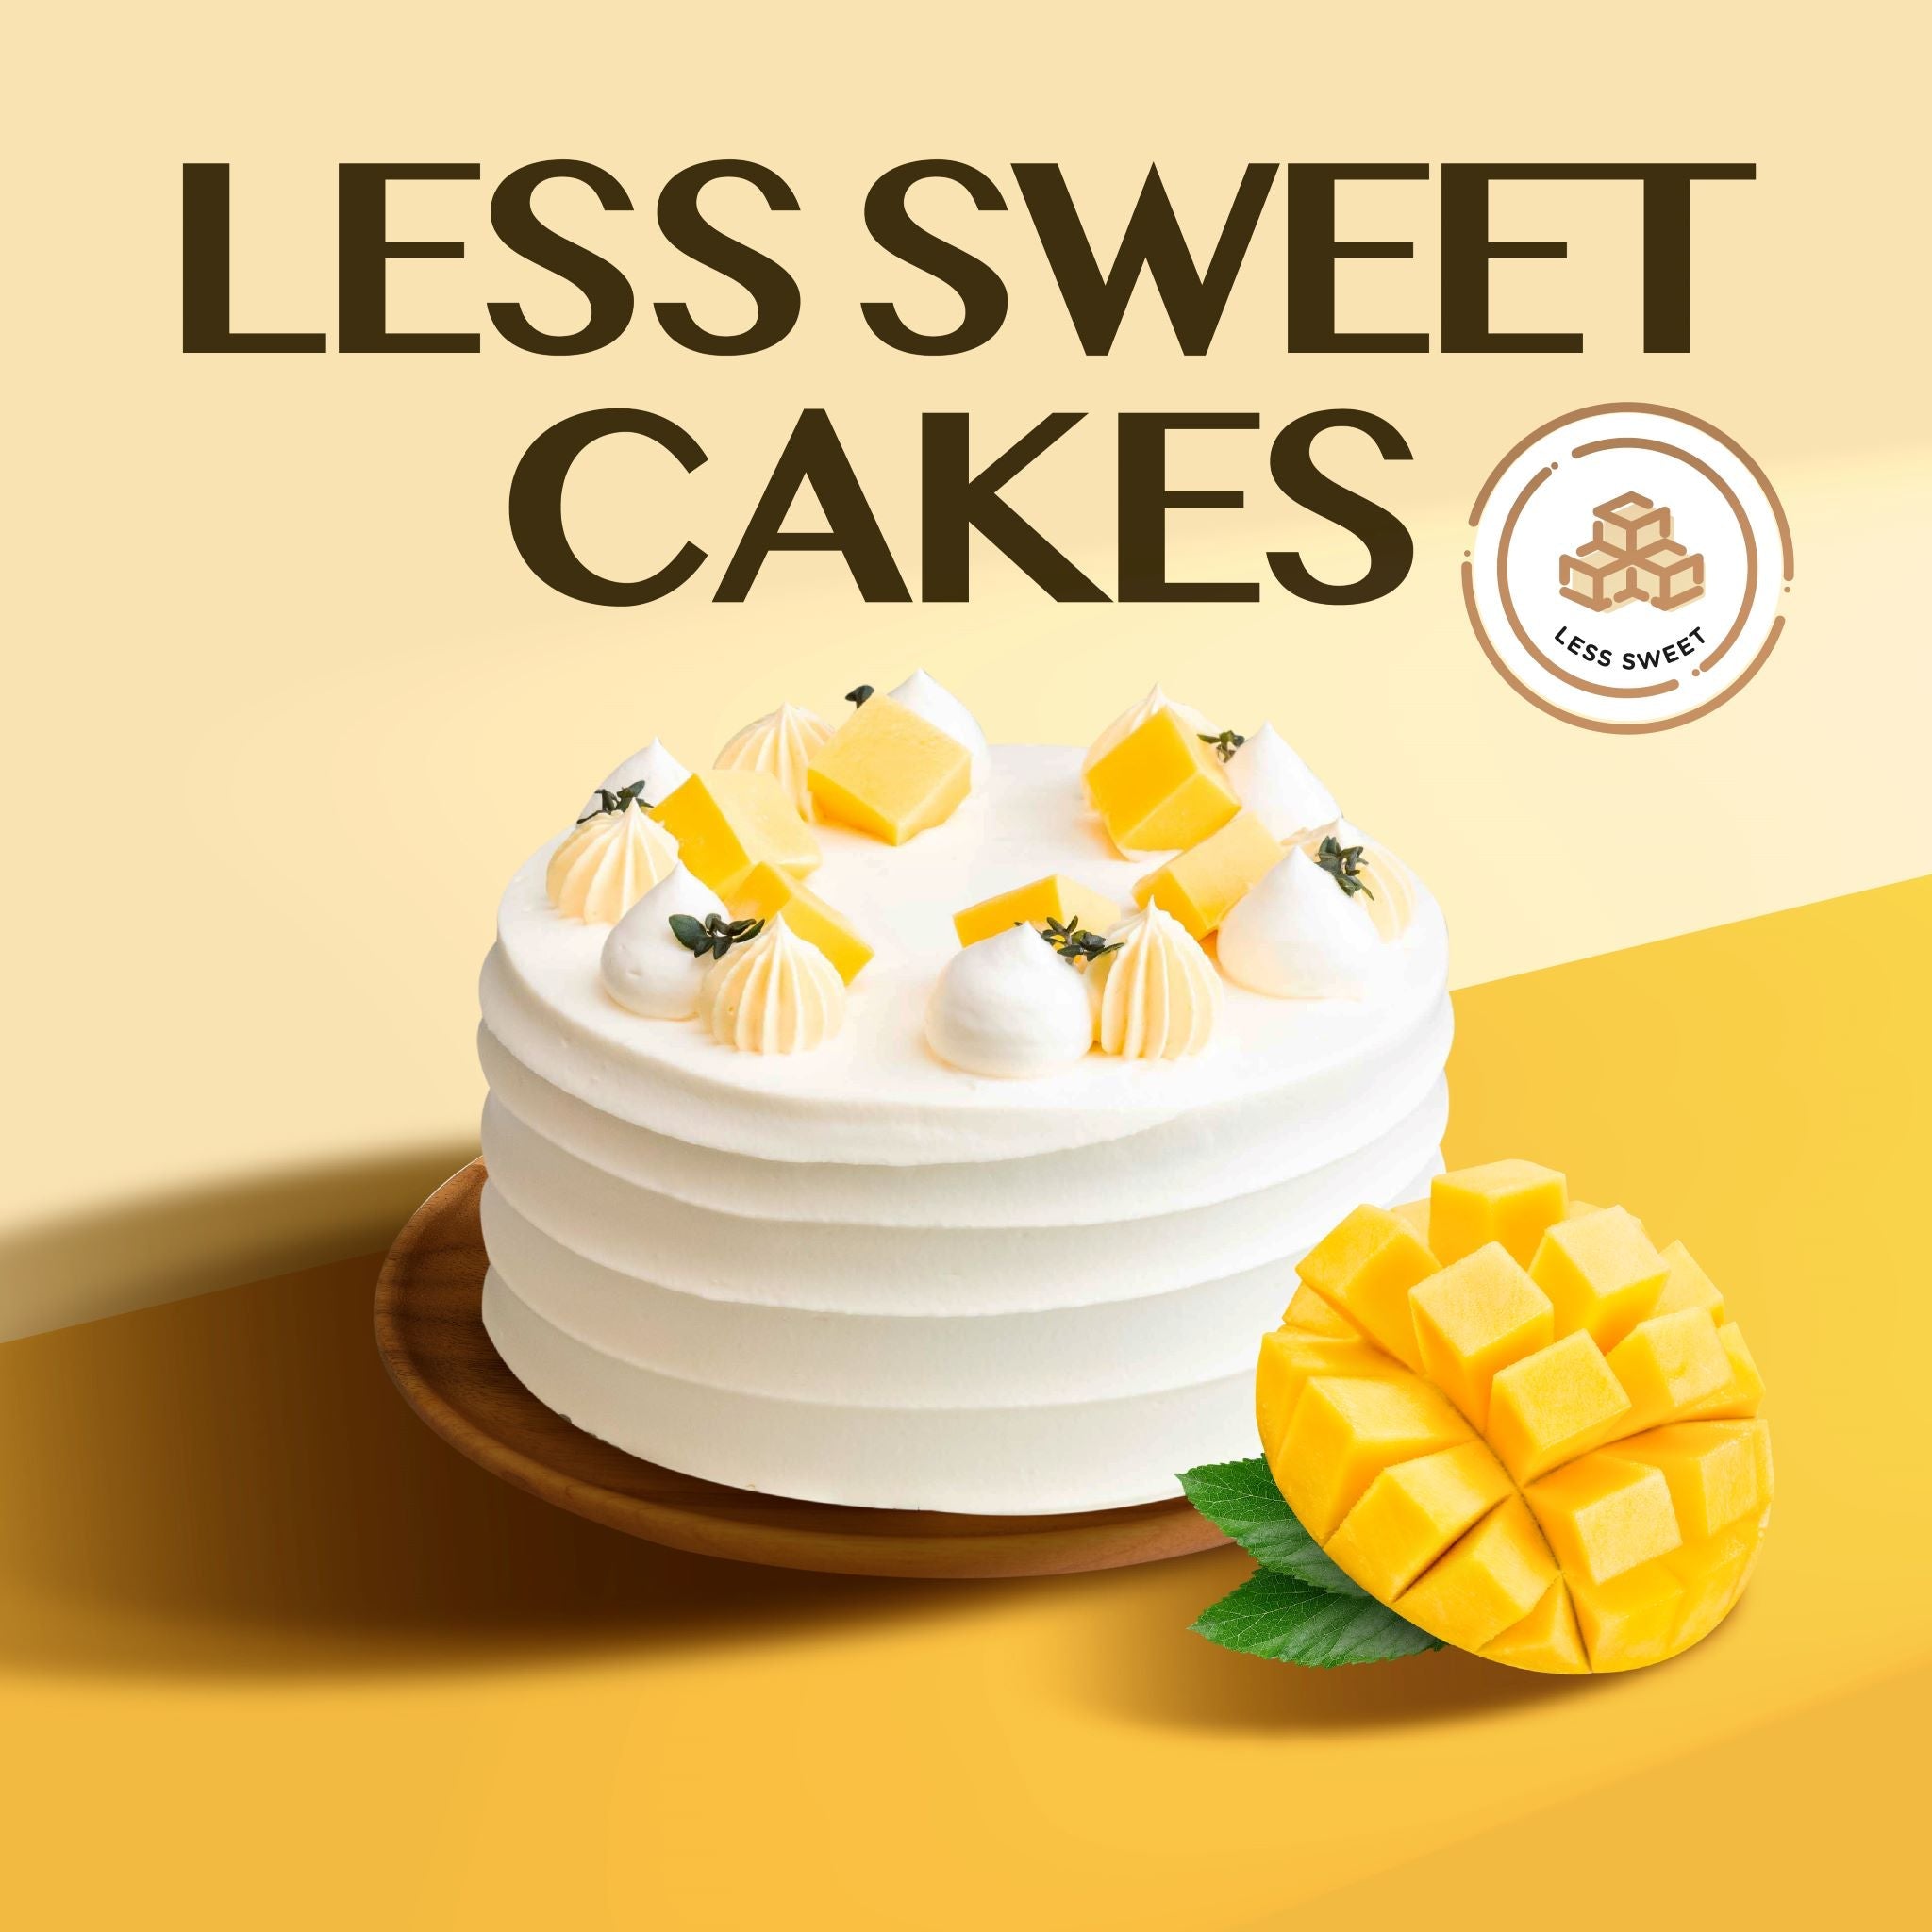 Online Cake Delivery in Gurgaon & Noida | 3 Hr Delivery - Cake @₹400‎ –  Page 93 – Creme Castle